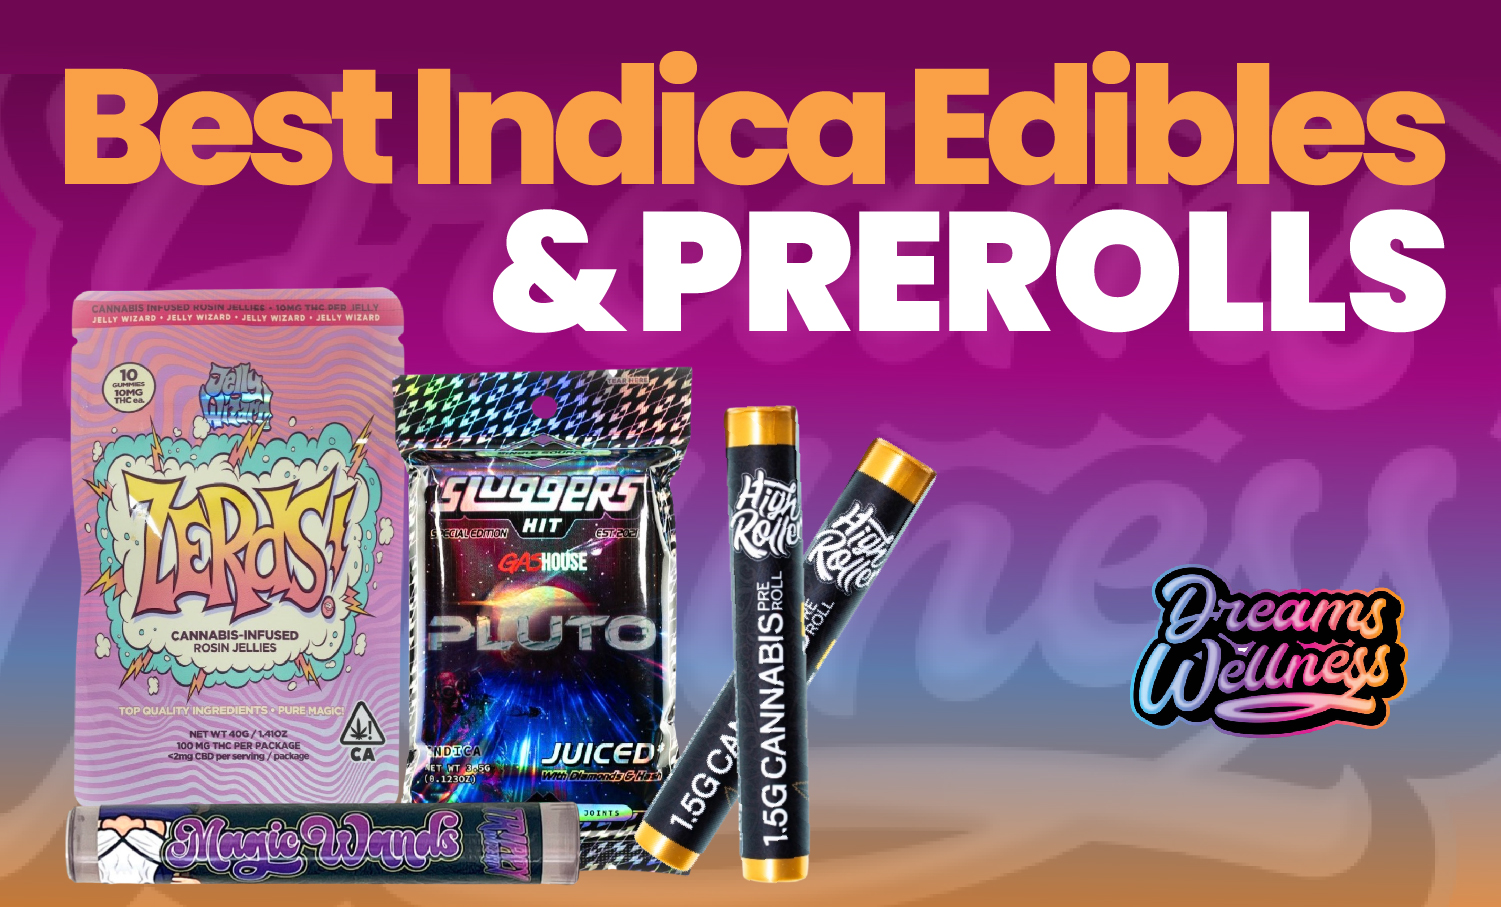 best indica edibles and prerolls